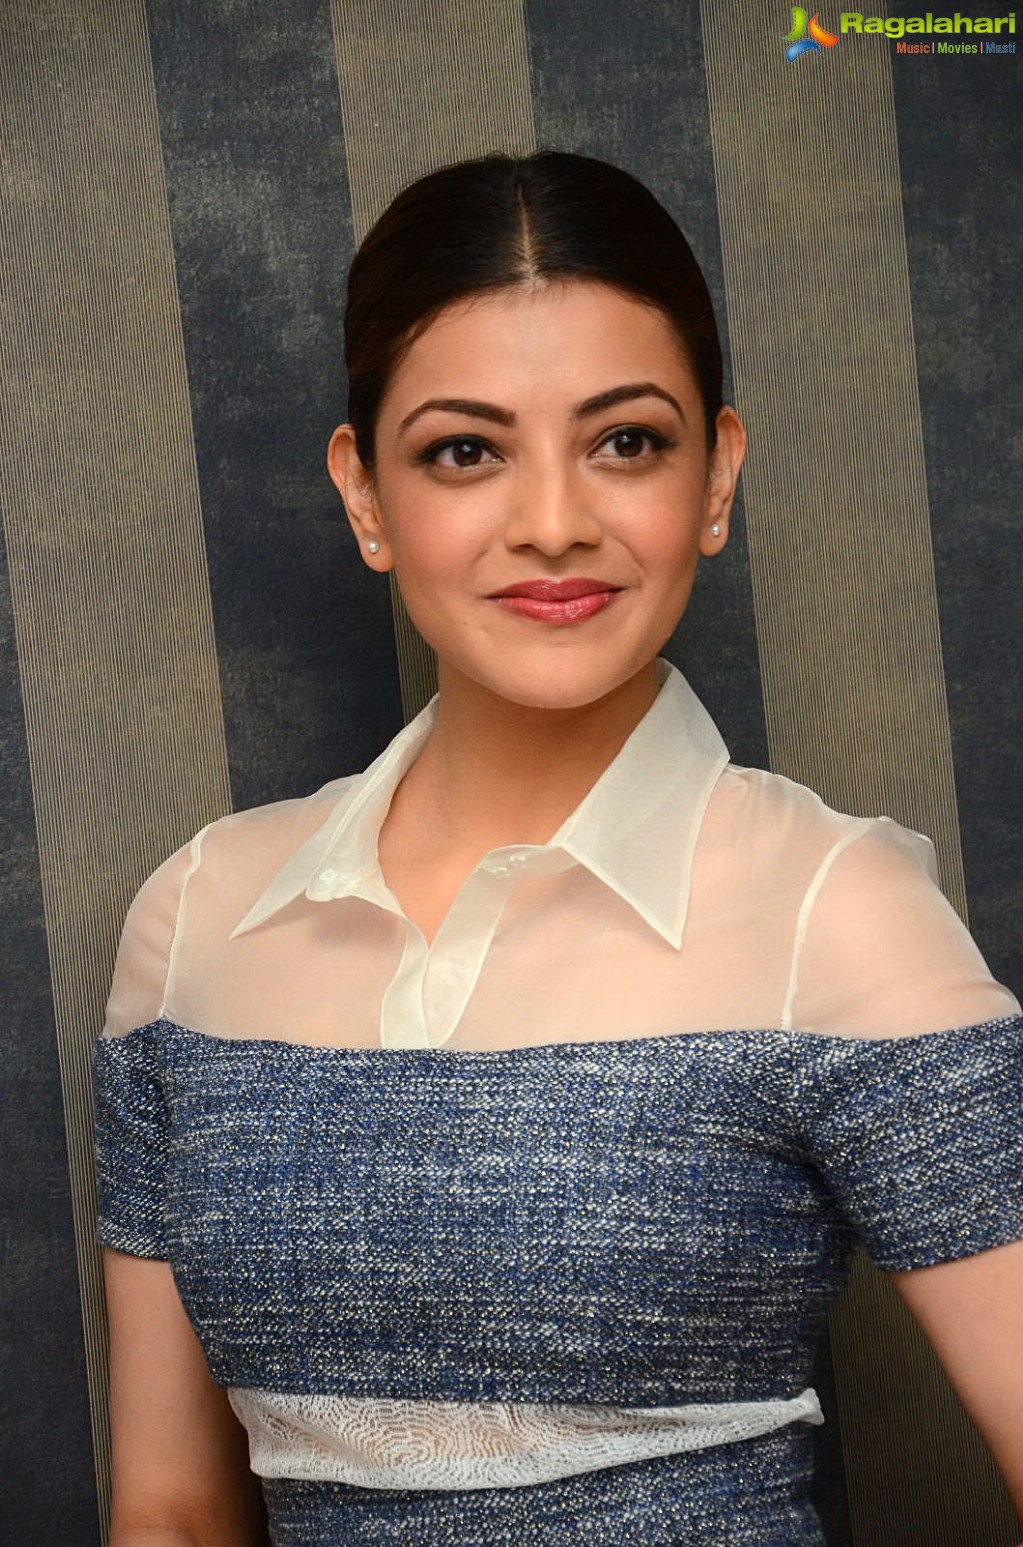 Kajal Aggarwal Khaidi Number 150 Interview Photos, Images